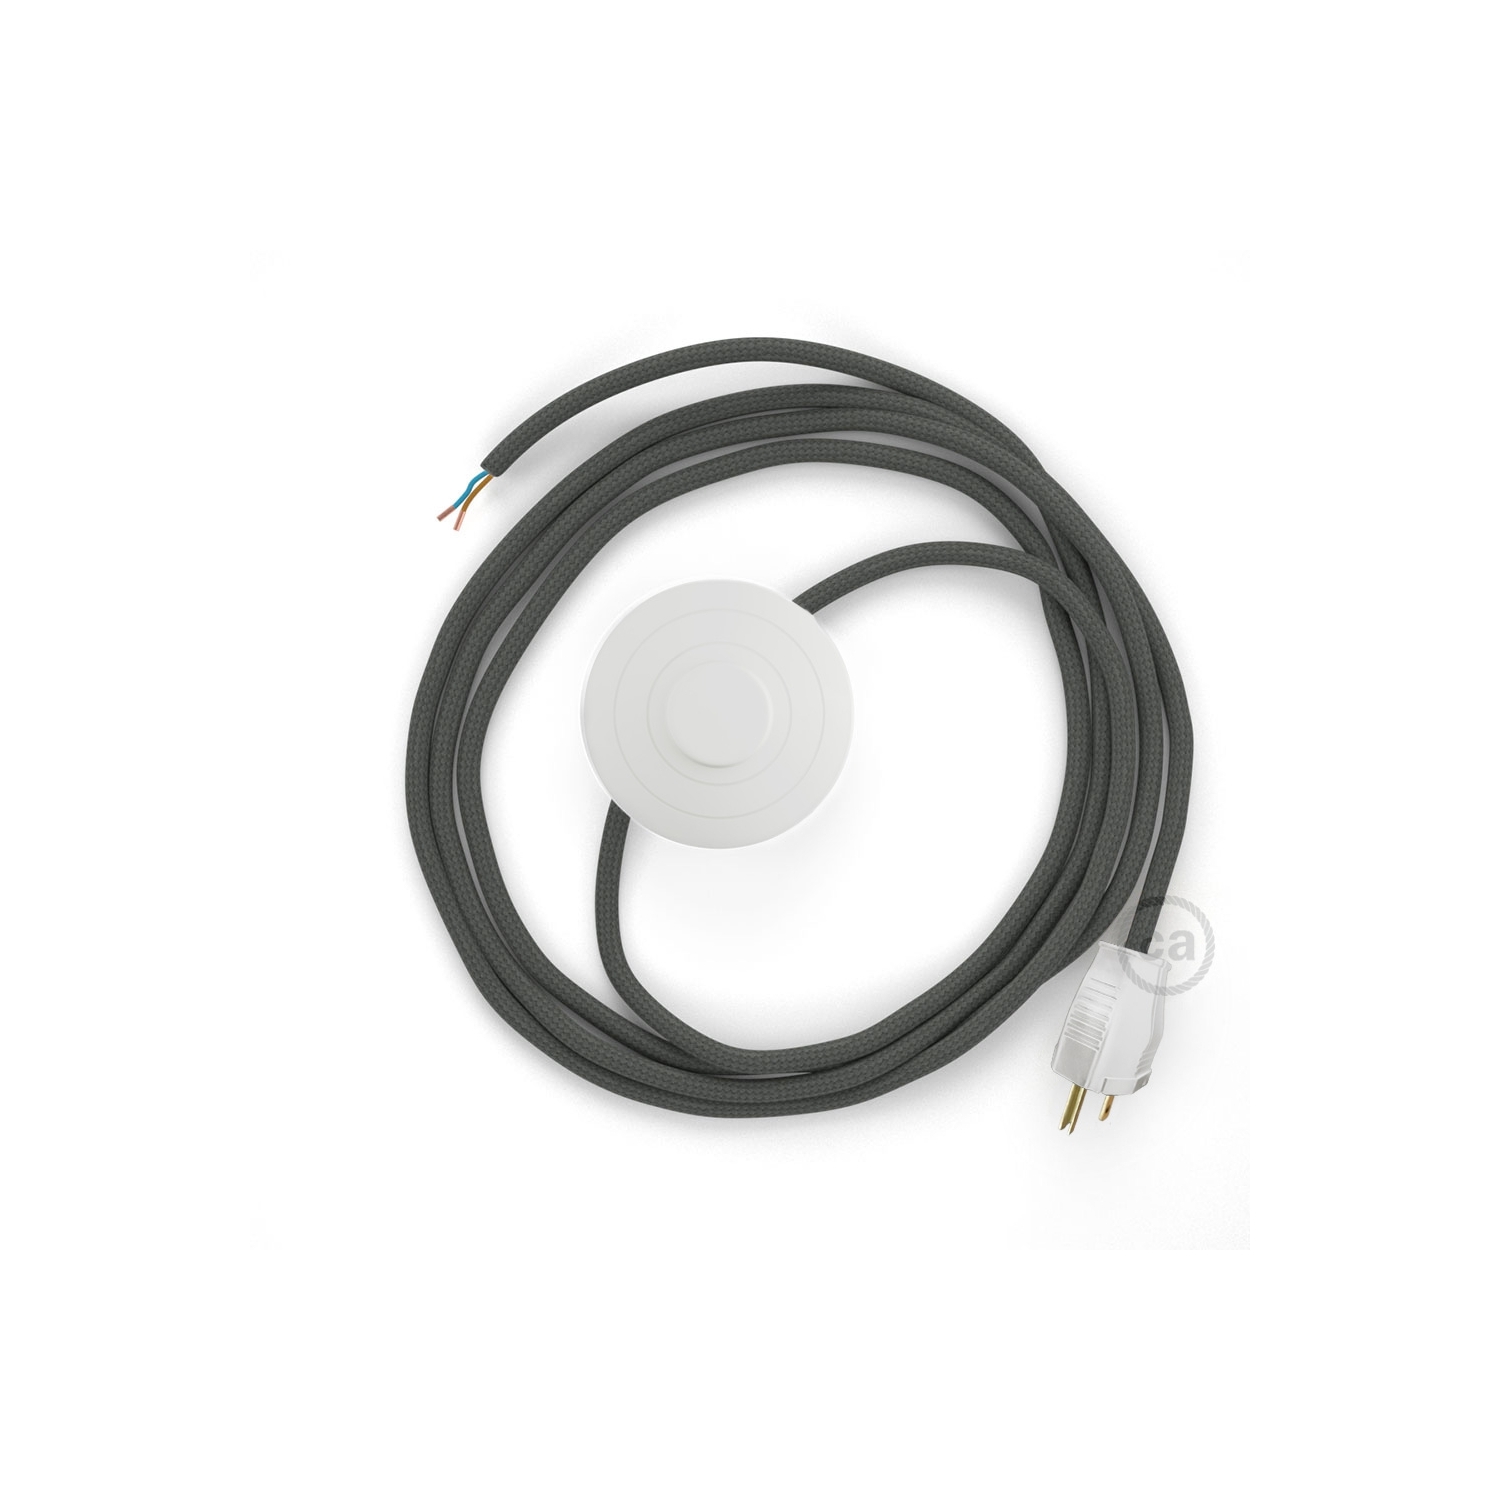 Power Cord with foot switch, RM03 Gray Rayon - Choose color of switch/plug